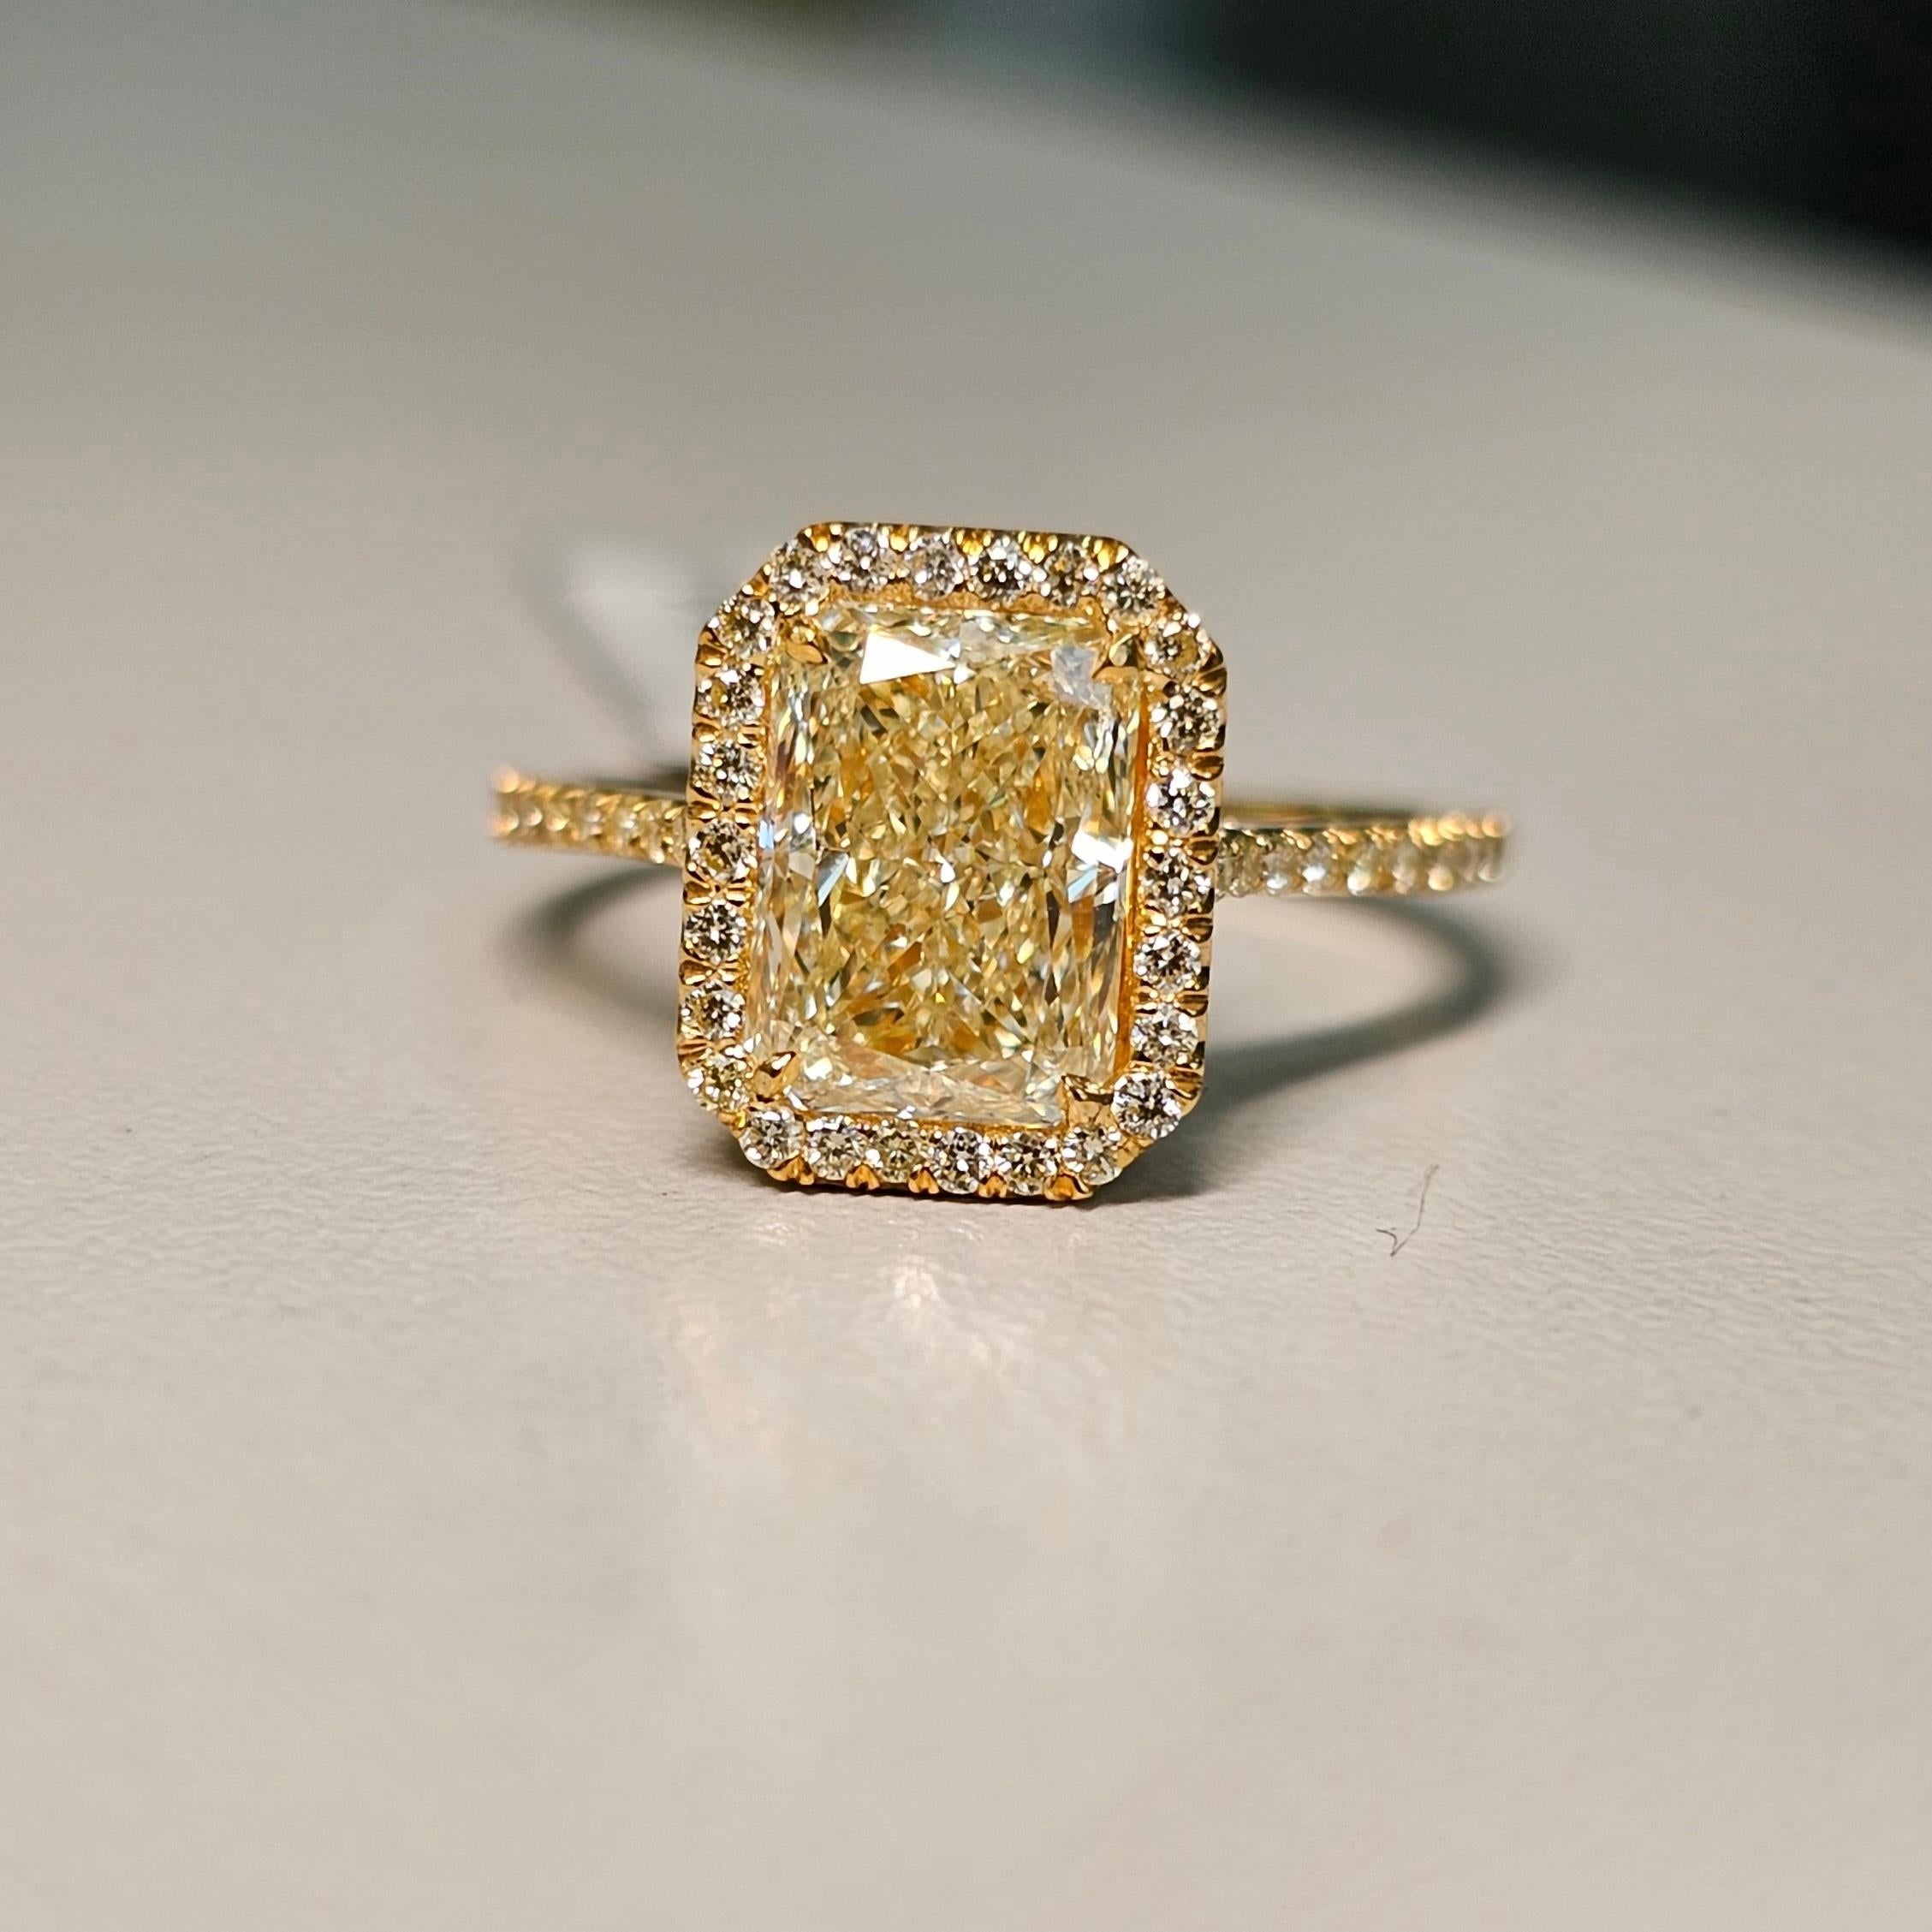 Our classic Yellow on Yellow style radiant diamond engagement ring. 
 
A perfectly elongated 2 carat WX colored radiant with a huge spread and amazing life. No bow tie, full of color.
Set in an all 18kt Yellow Gold ring with 0.32ct of yellow diamond